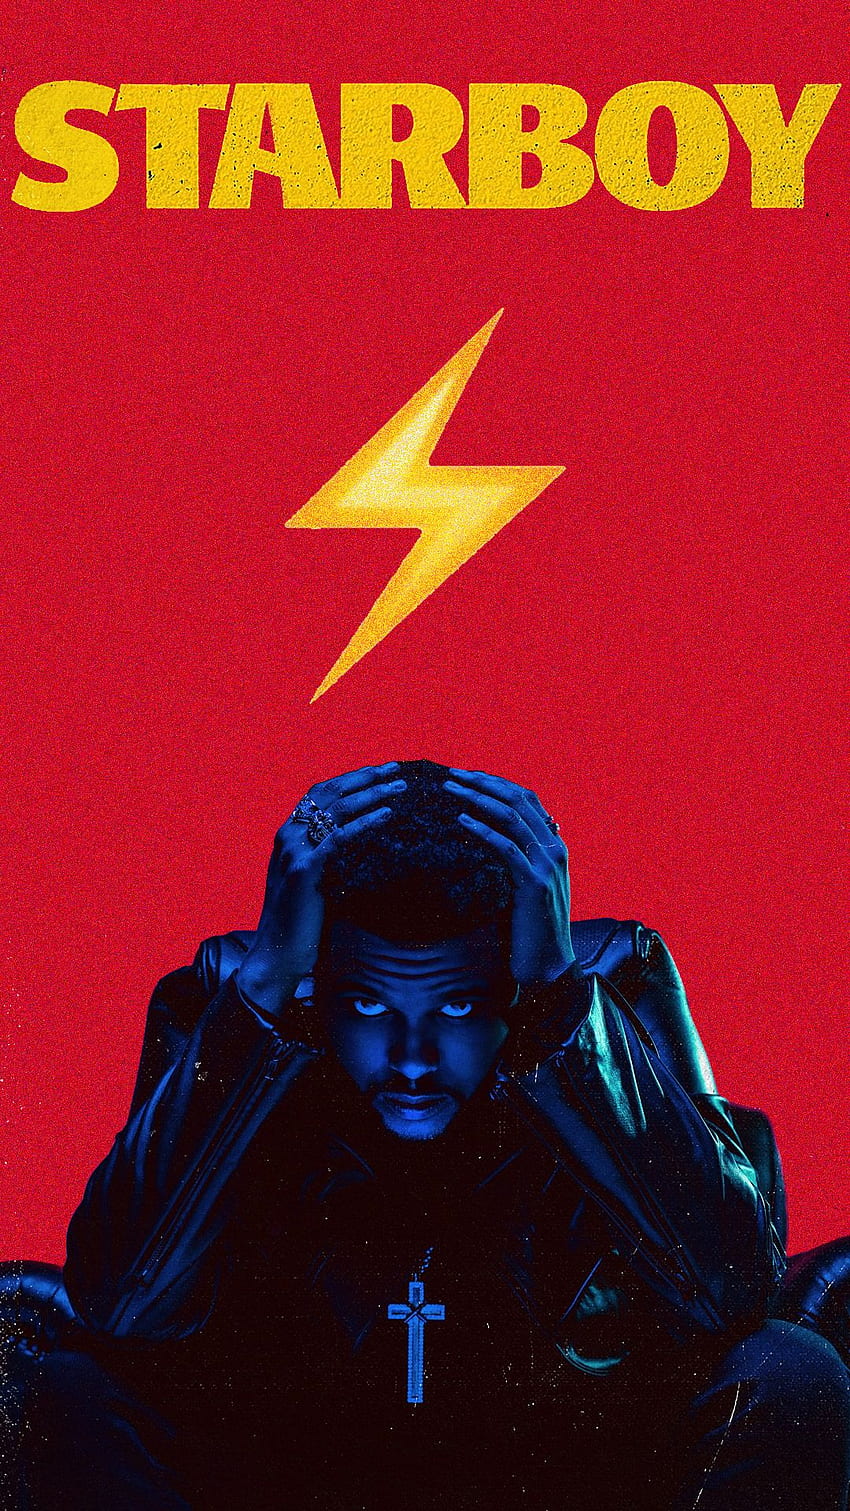 Made One Real Quick for iPhone - Weeknd Starboy -、ザ・ウィークエンド HD電話の壁紙